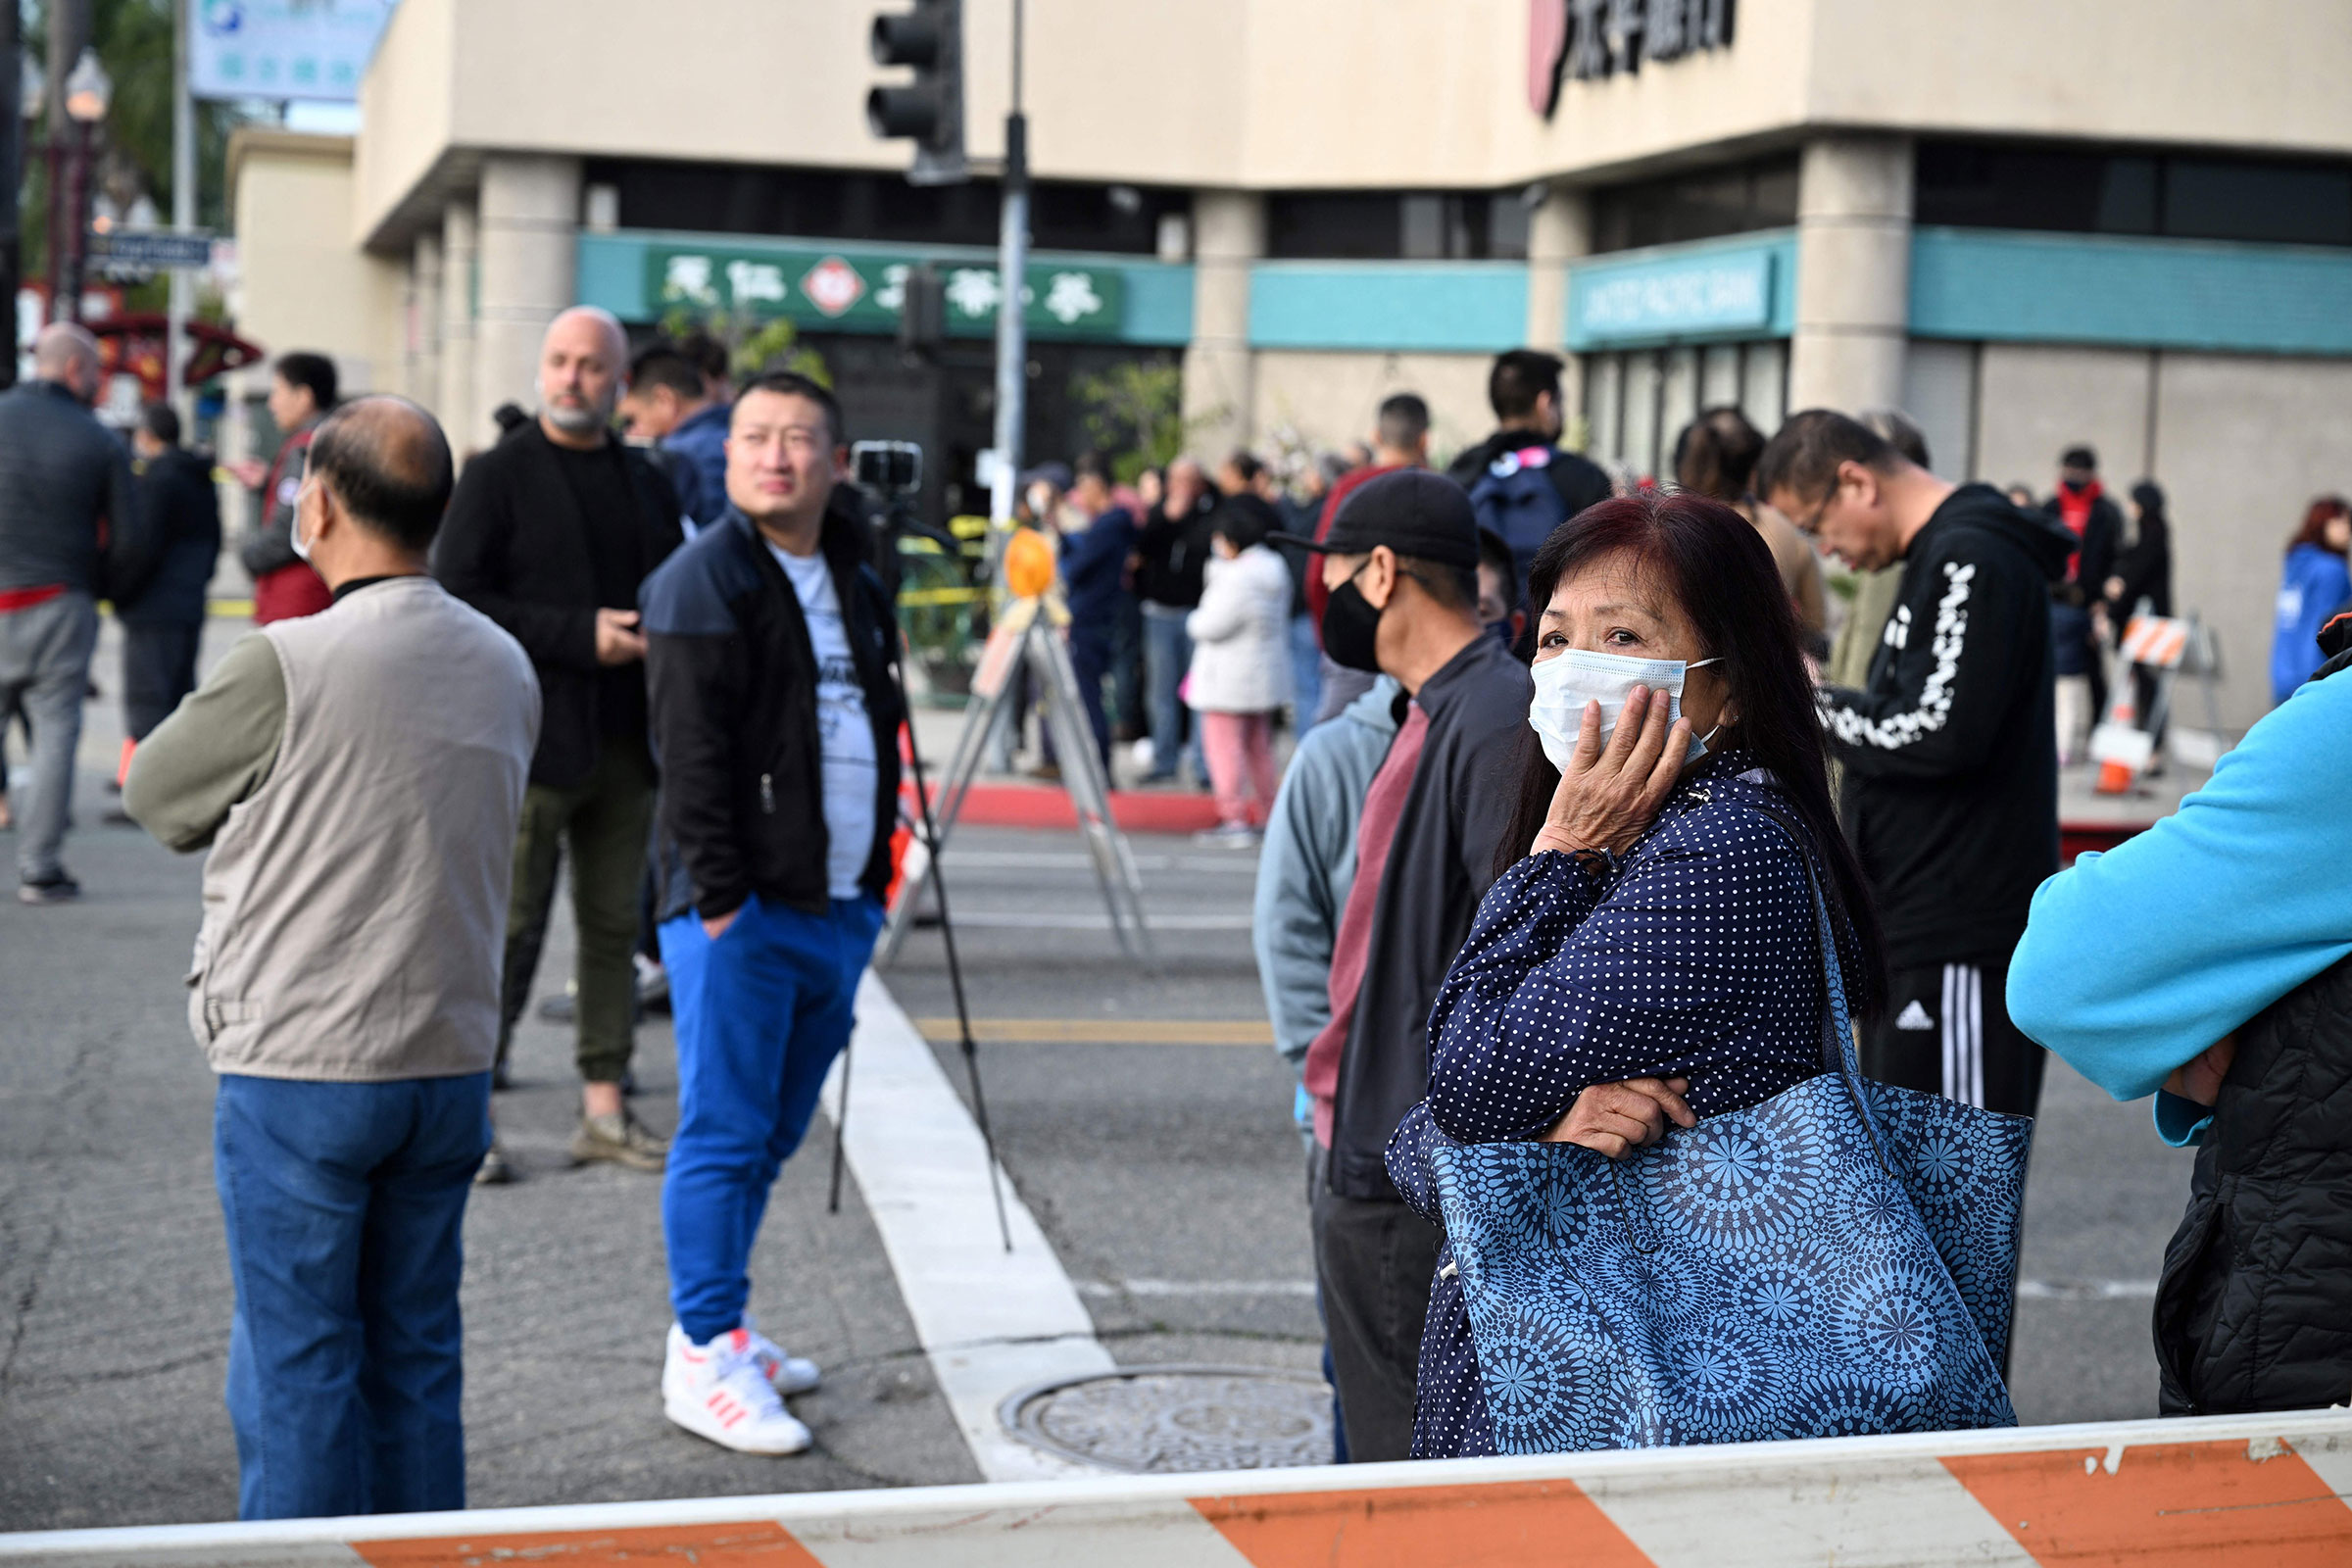 Local residents watch police investigate the scene of a mass shooting in Monterey Park, Calif., on Jan. 22, 2023. (Robyn Beck—AFP/Getty Images)